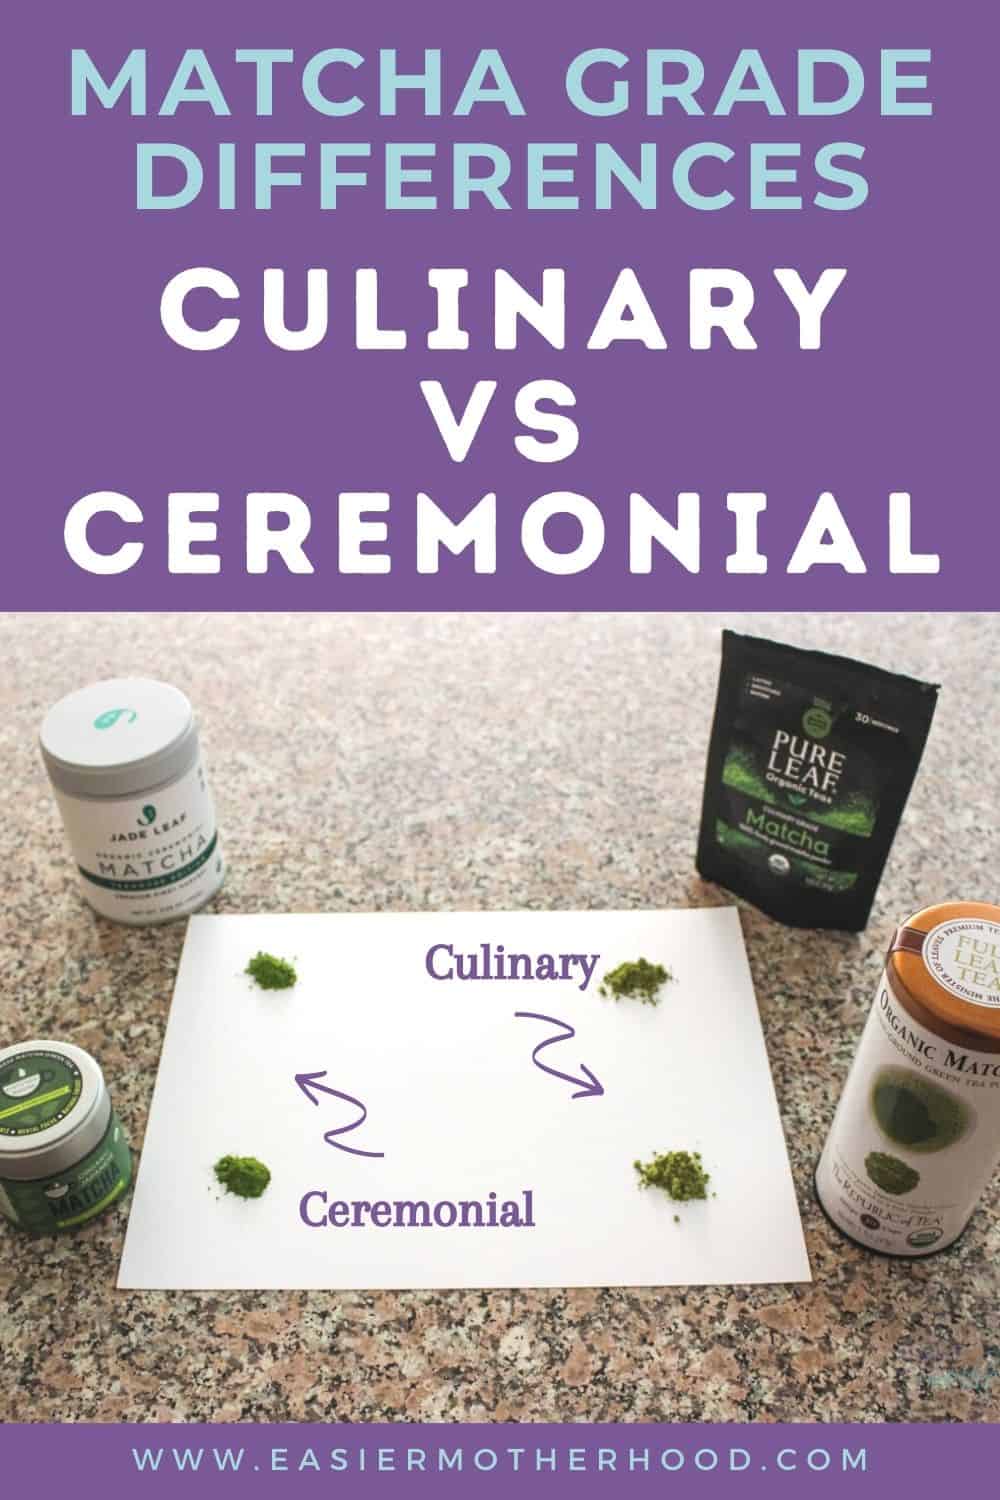 Pin with 4 matcha powders on white paper with the associated containers next to each. Text above reads "matcha grade differences culinary vs ceremonial"